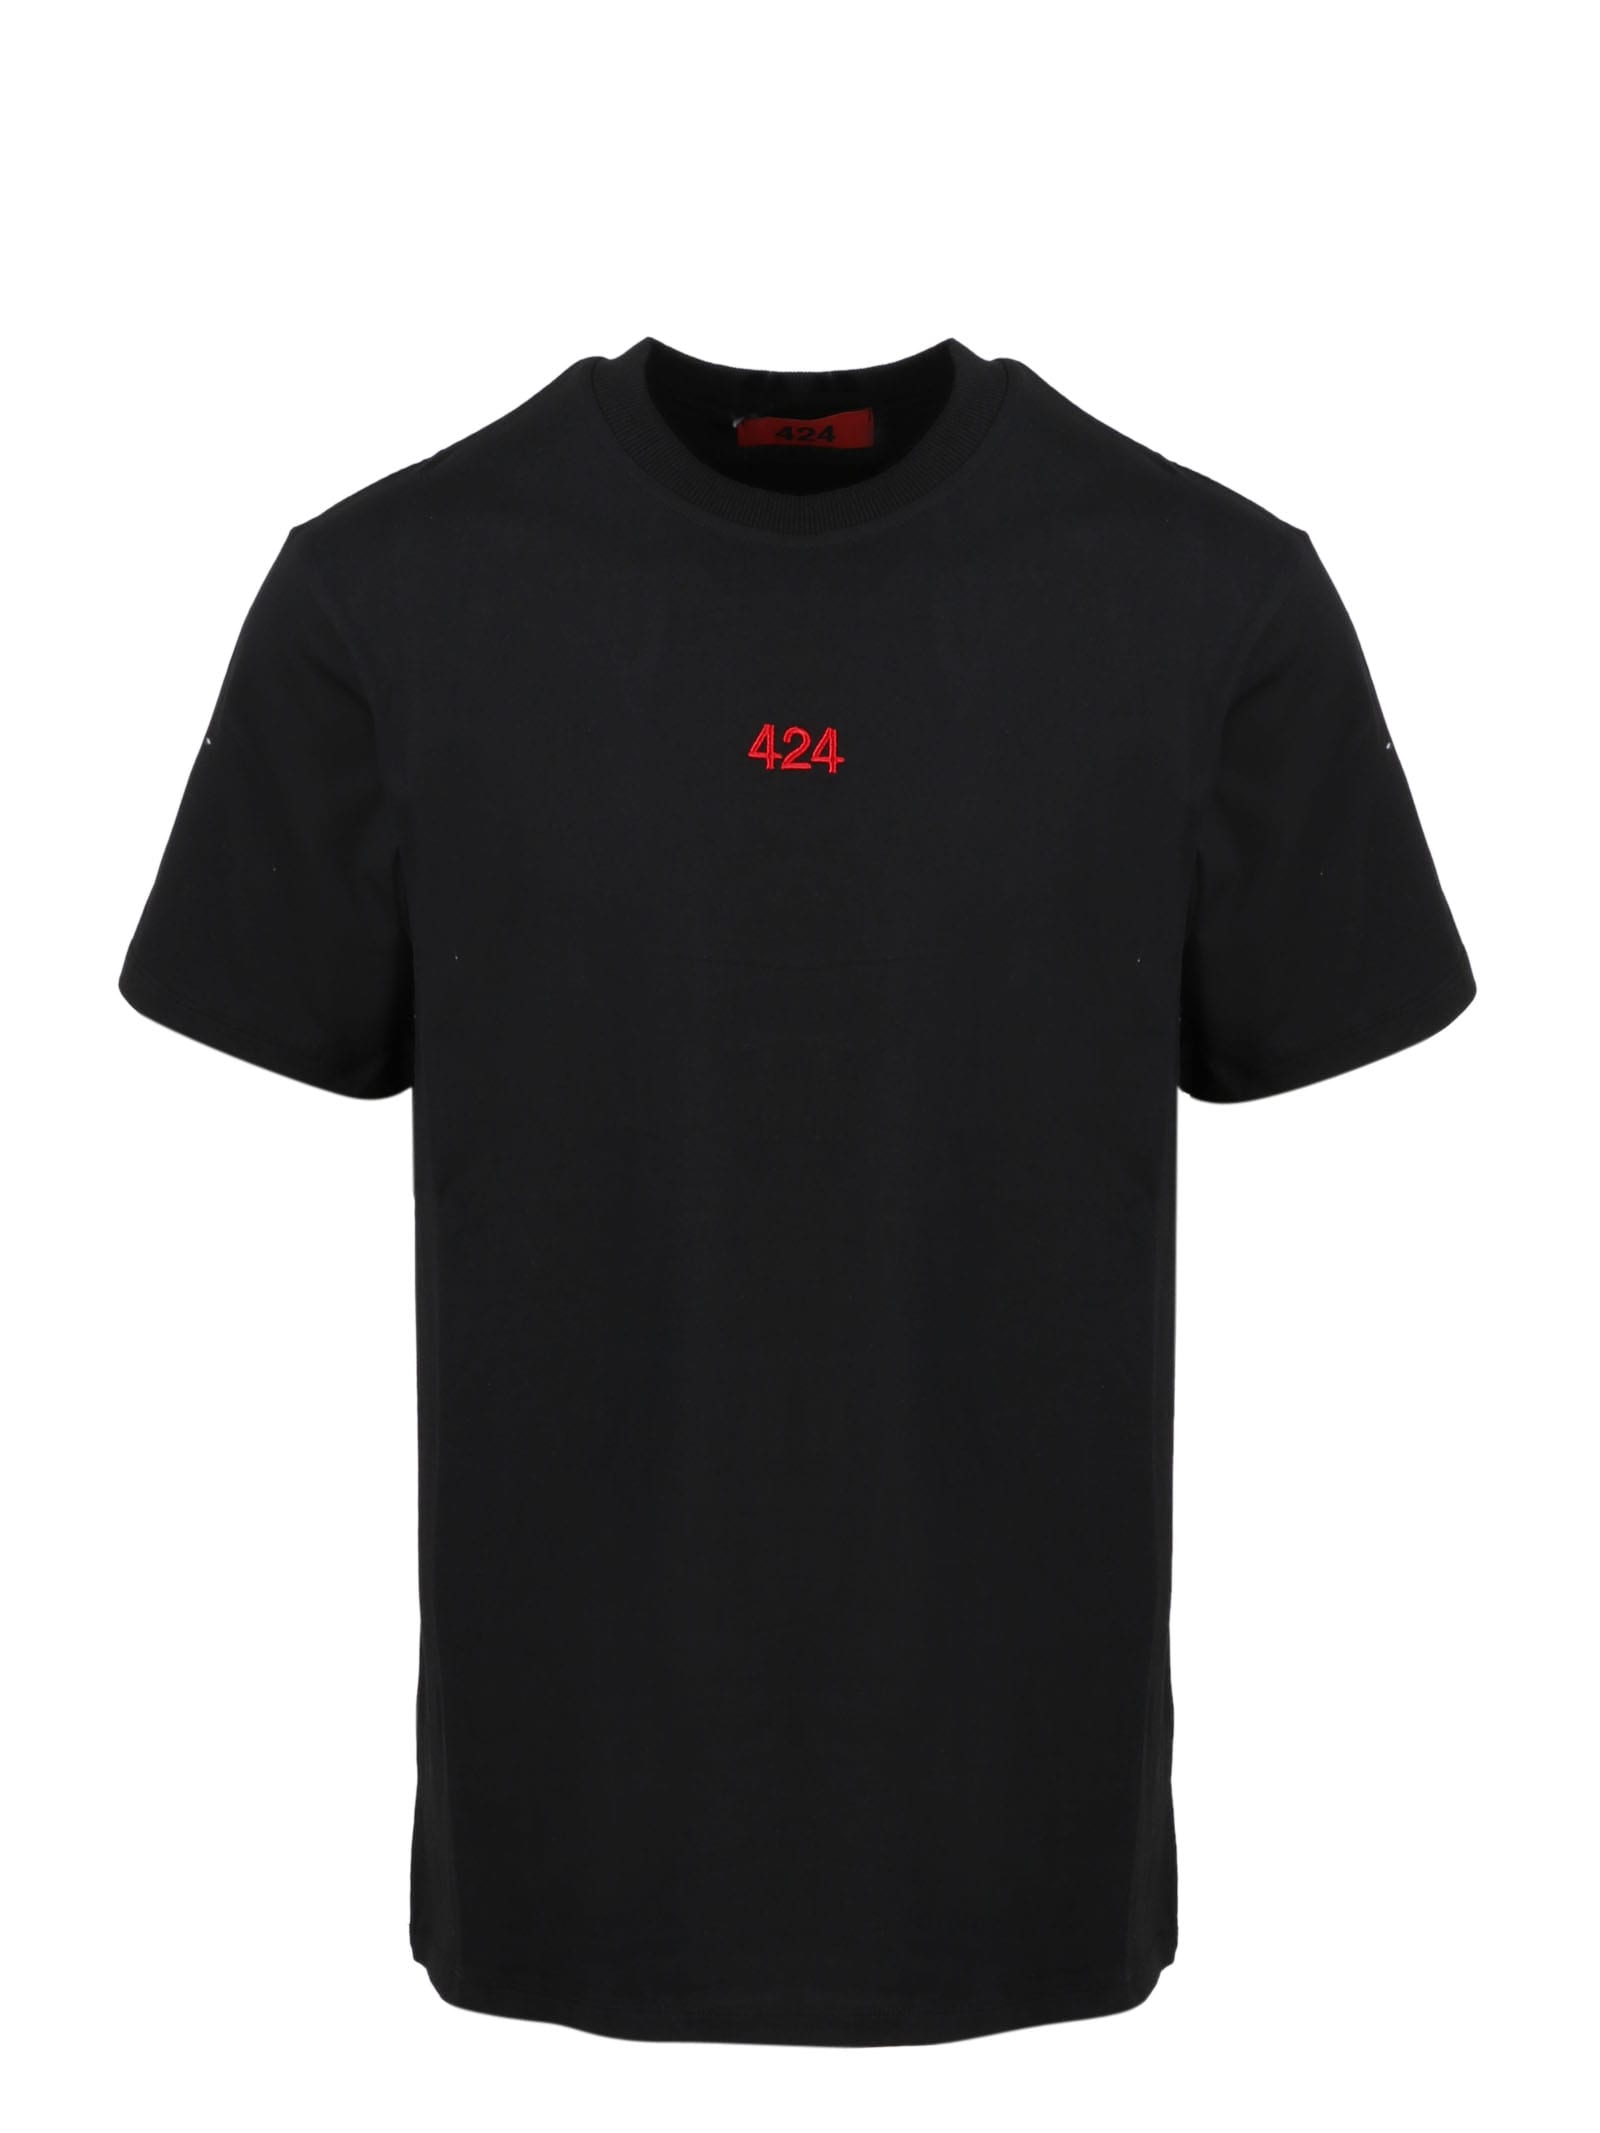 FourTwoFour on Fairfax 424 Embroidered T-shirt